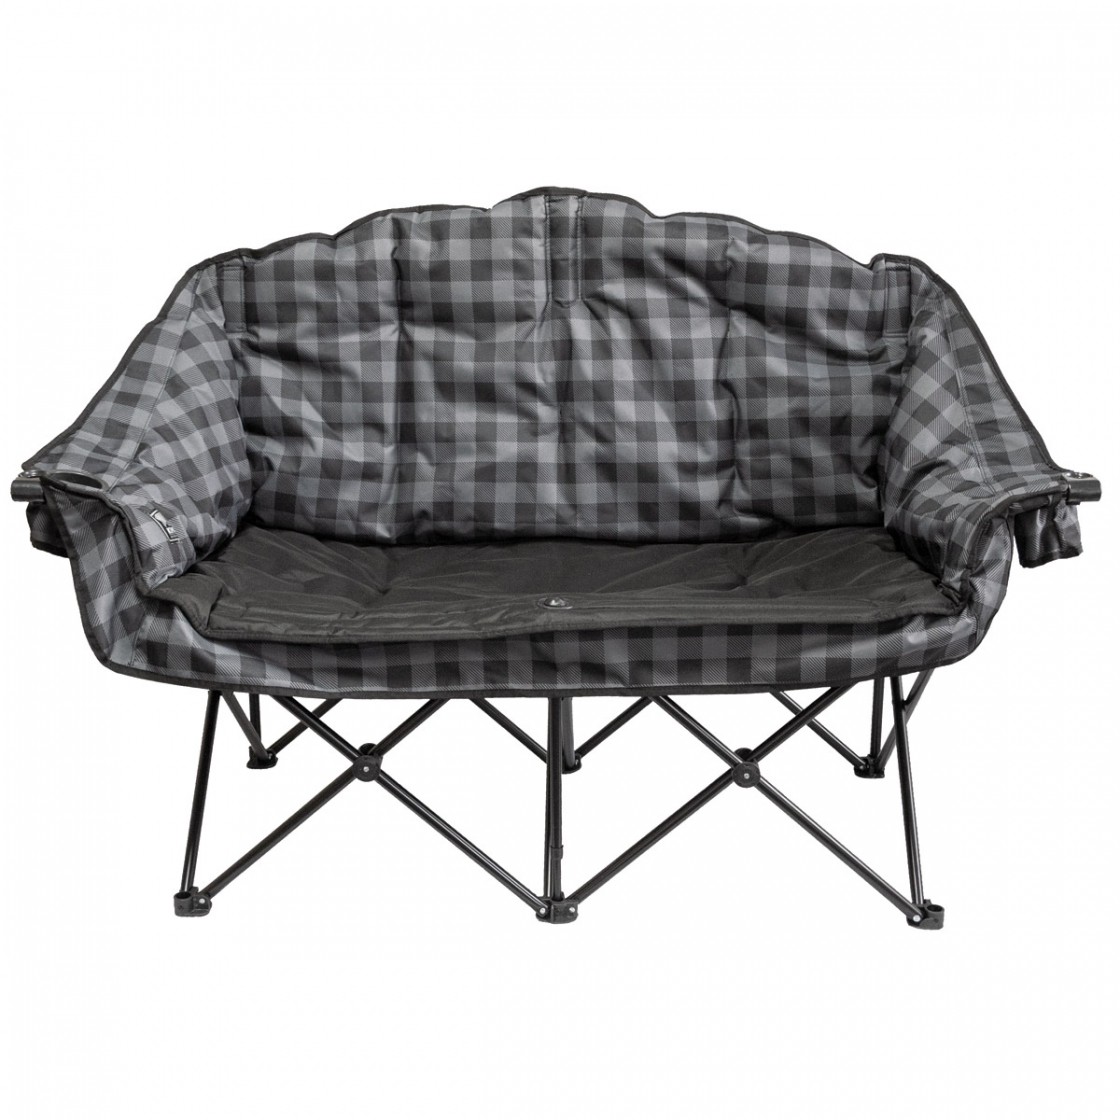 Double Camping Chair A Outdoor Gear, Double Camping Chairs Canada